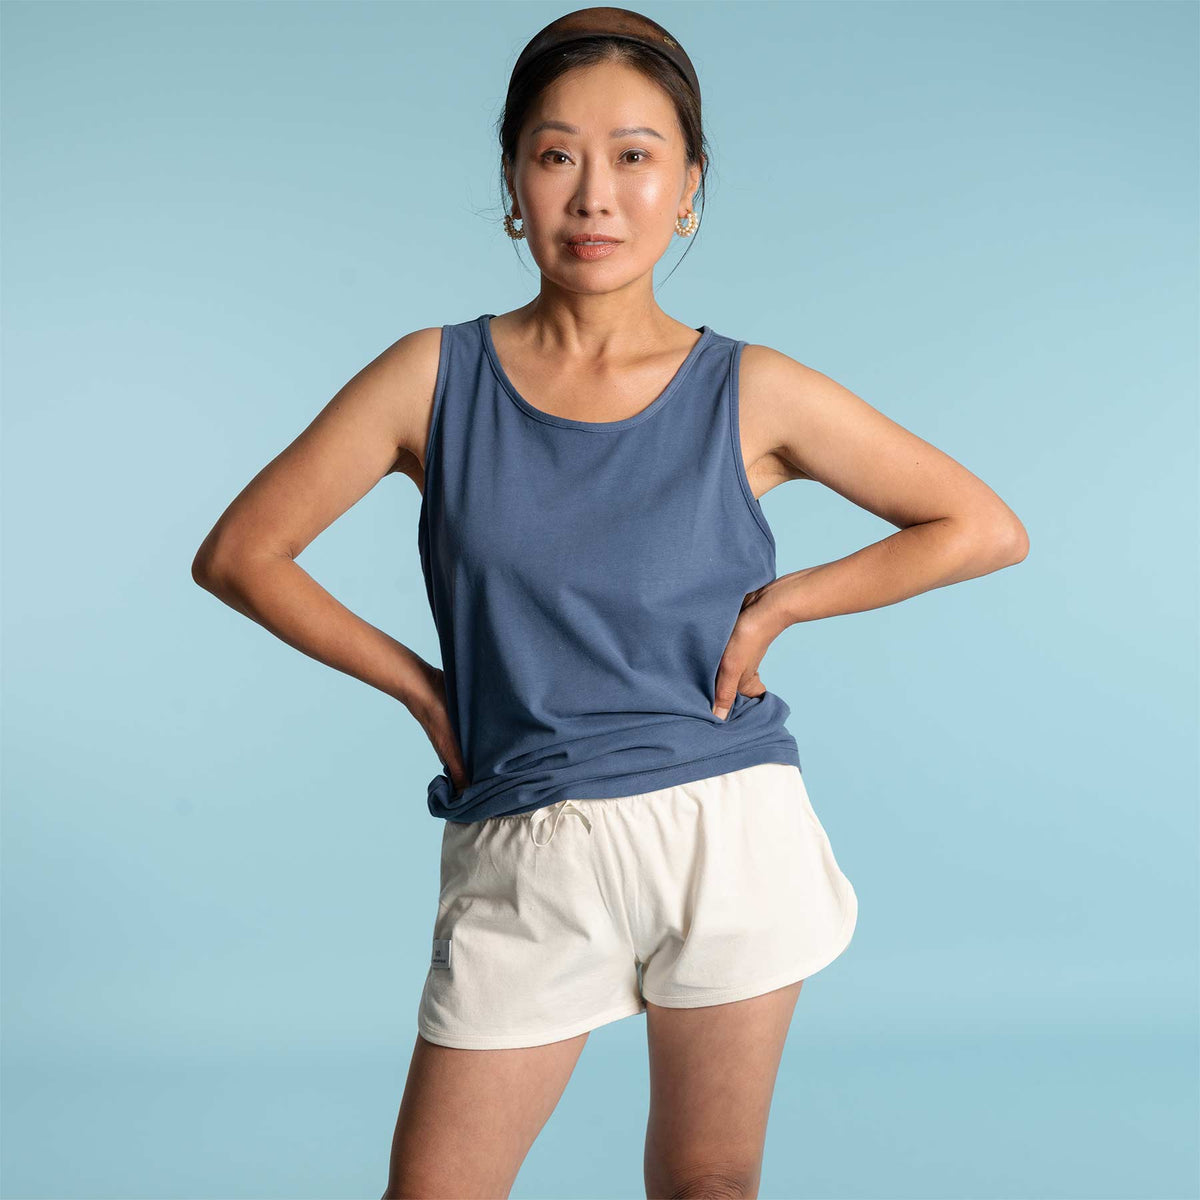 Women's Clearance Courtside Gym Short made with Organic Cotton